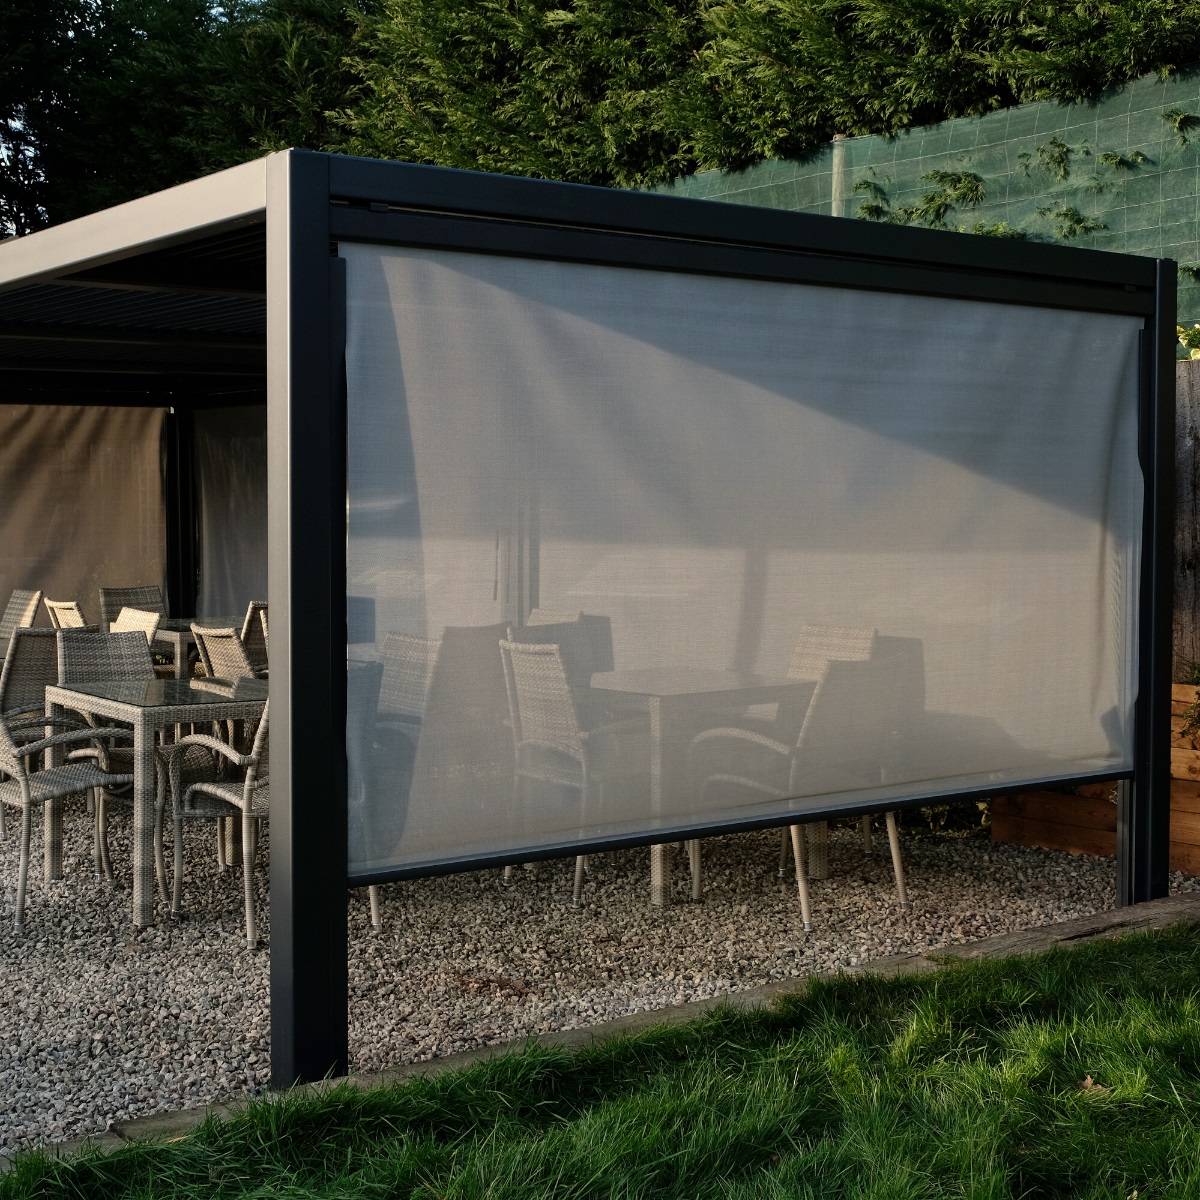 A luxury rectangular grey metal gazebo with rattan dining funiture underneath and a side blind down